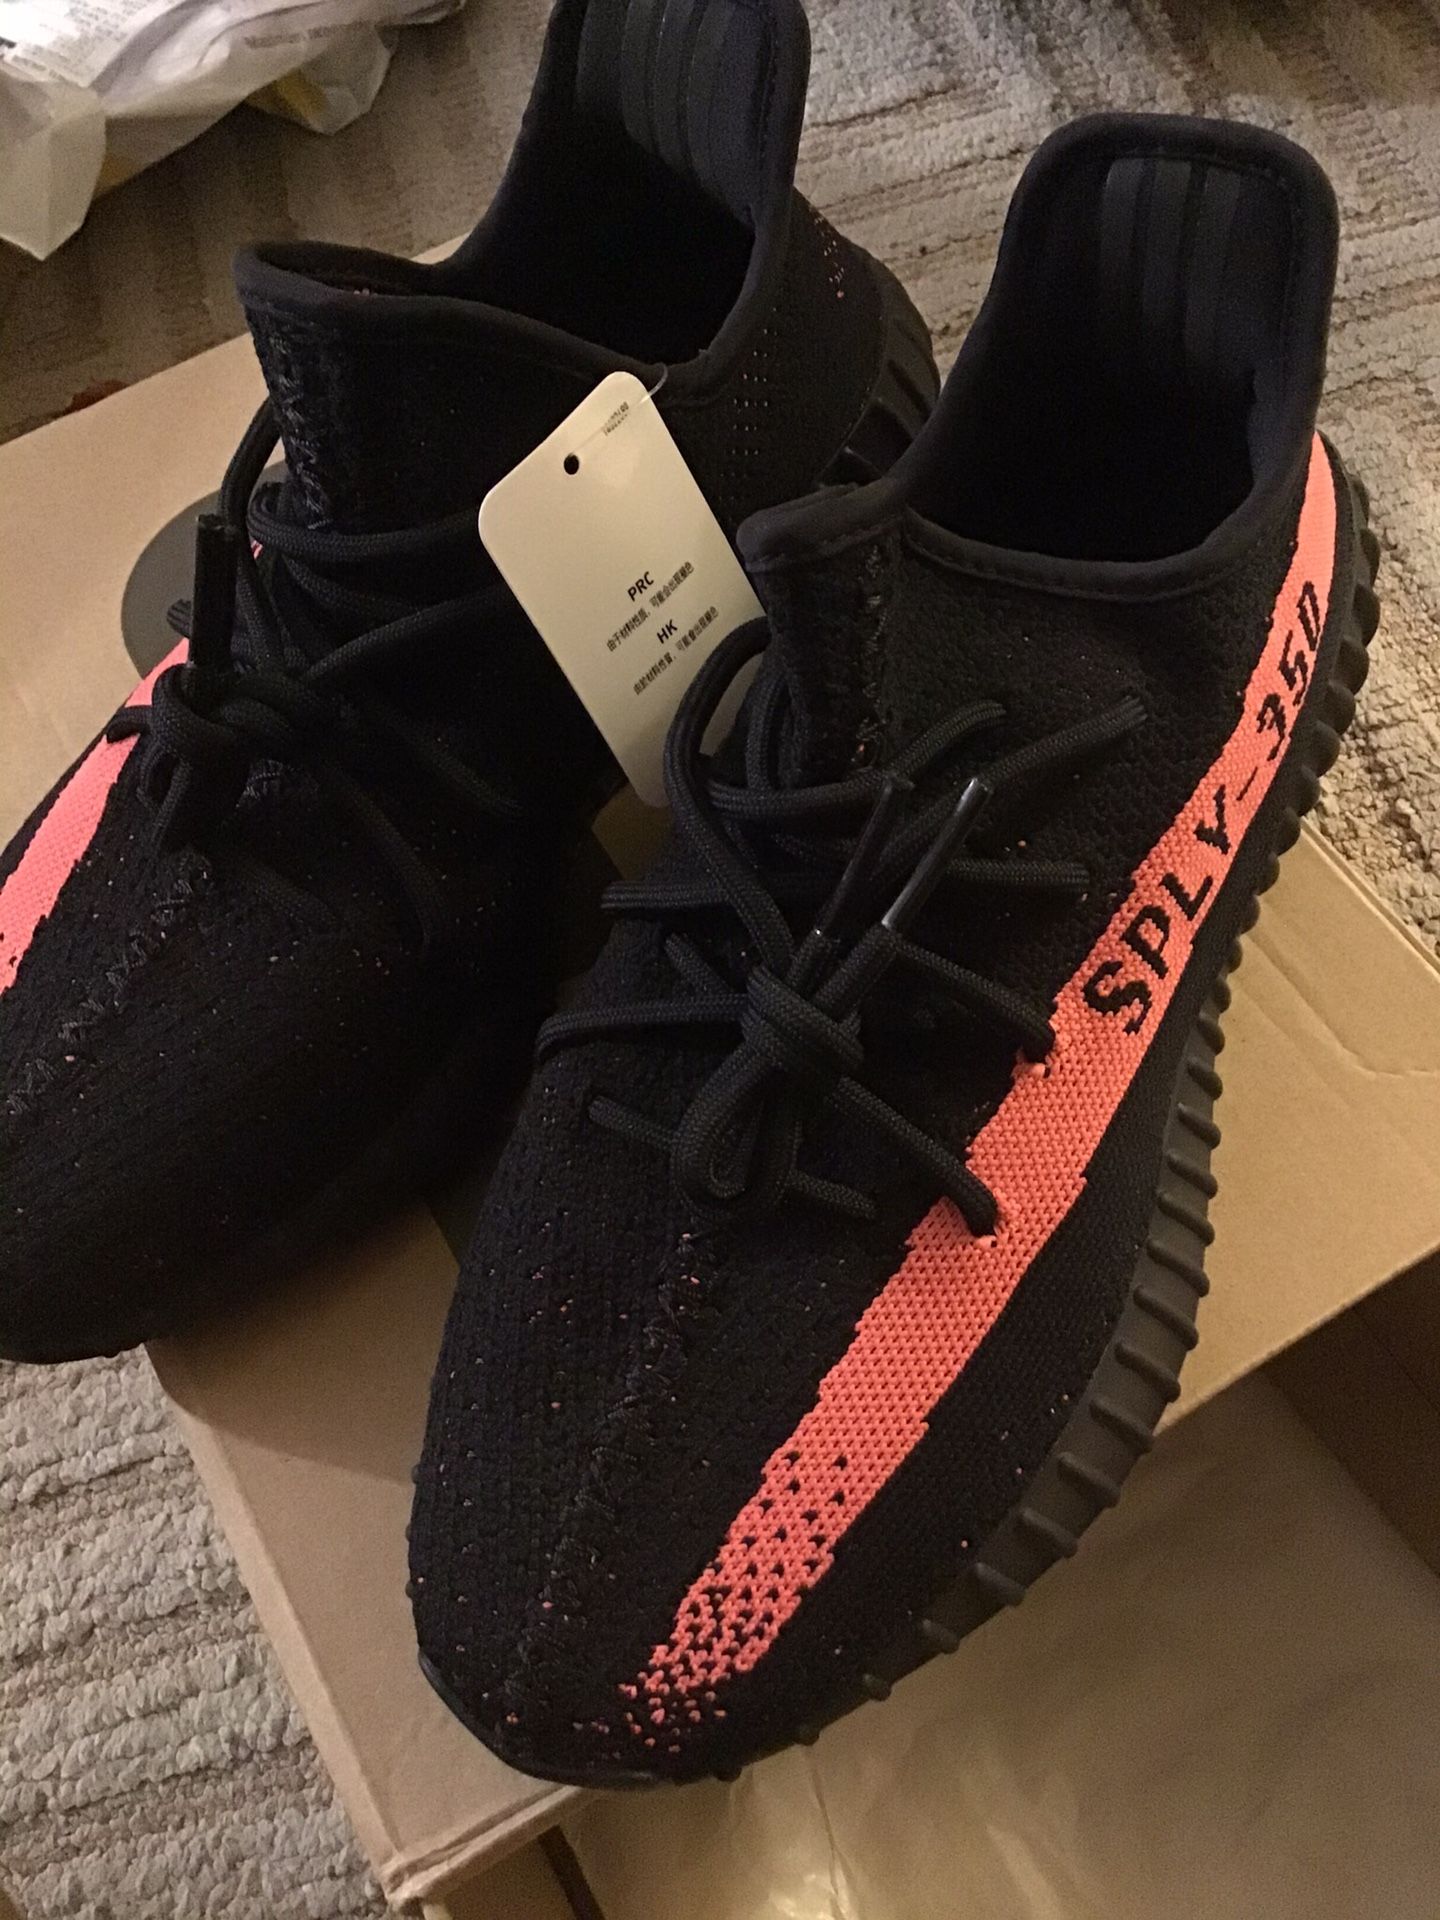 Yeezy boots 350 v2 black and red